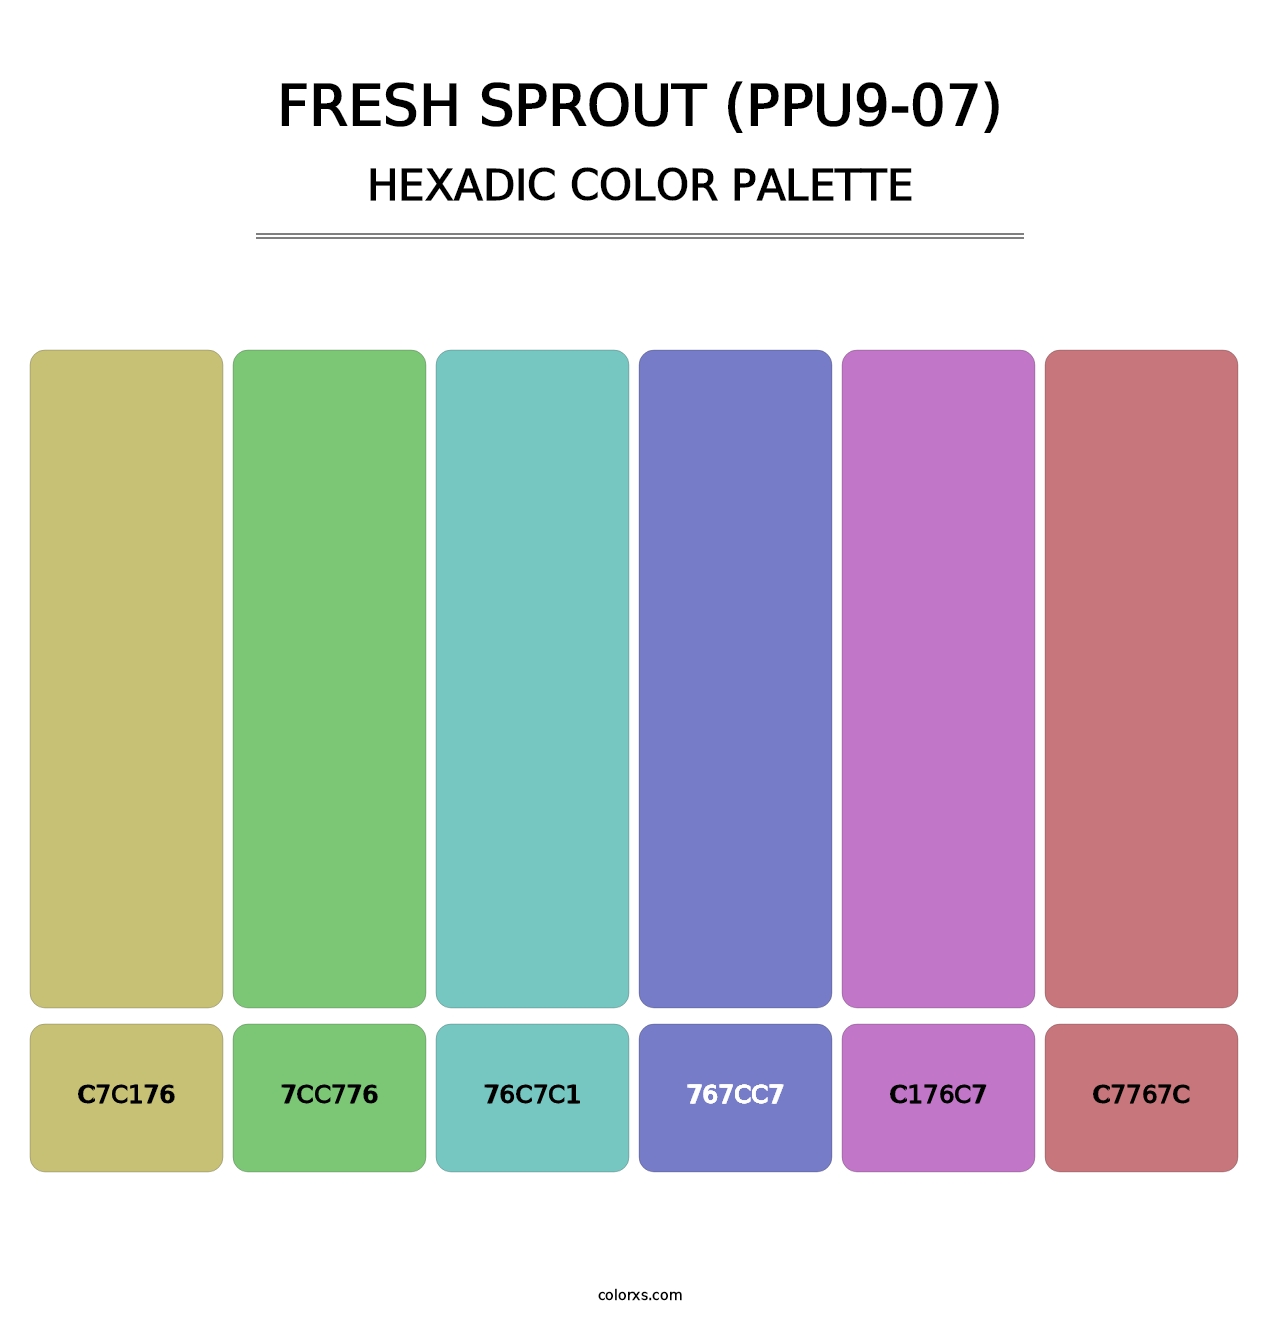 Fresh Sprout (PPU9-07) - Hexadic Color Palette